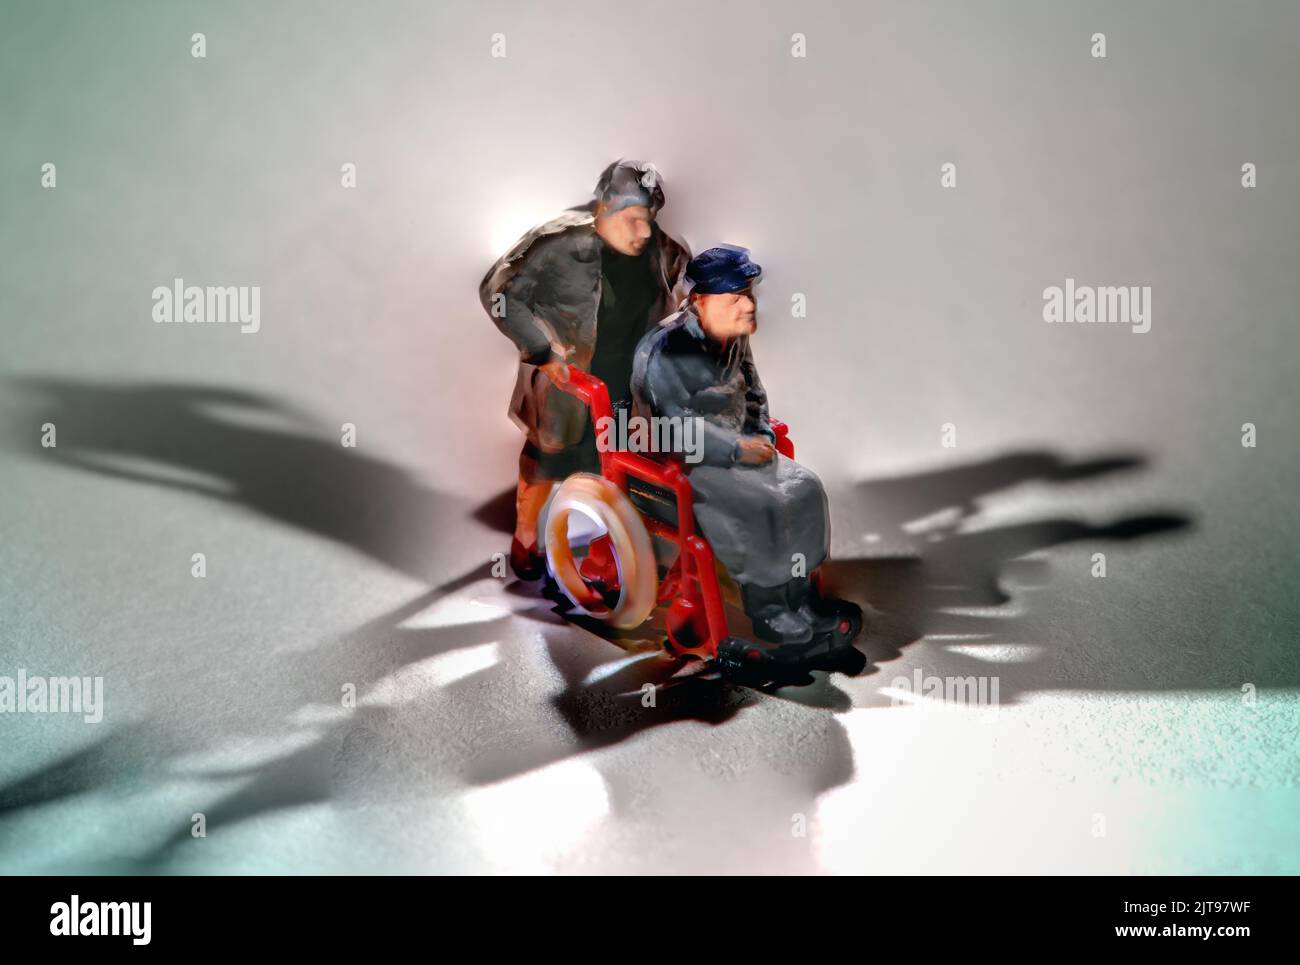 Miniature man pushing a friend or patient in a wheelchair in a concept of disability, mobility, healthcare and recuperation Stock Photo